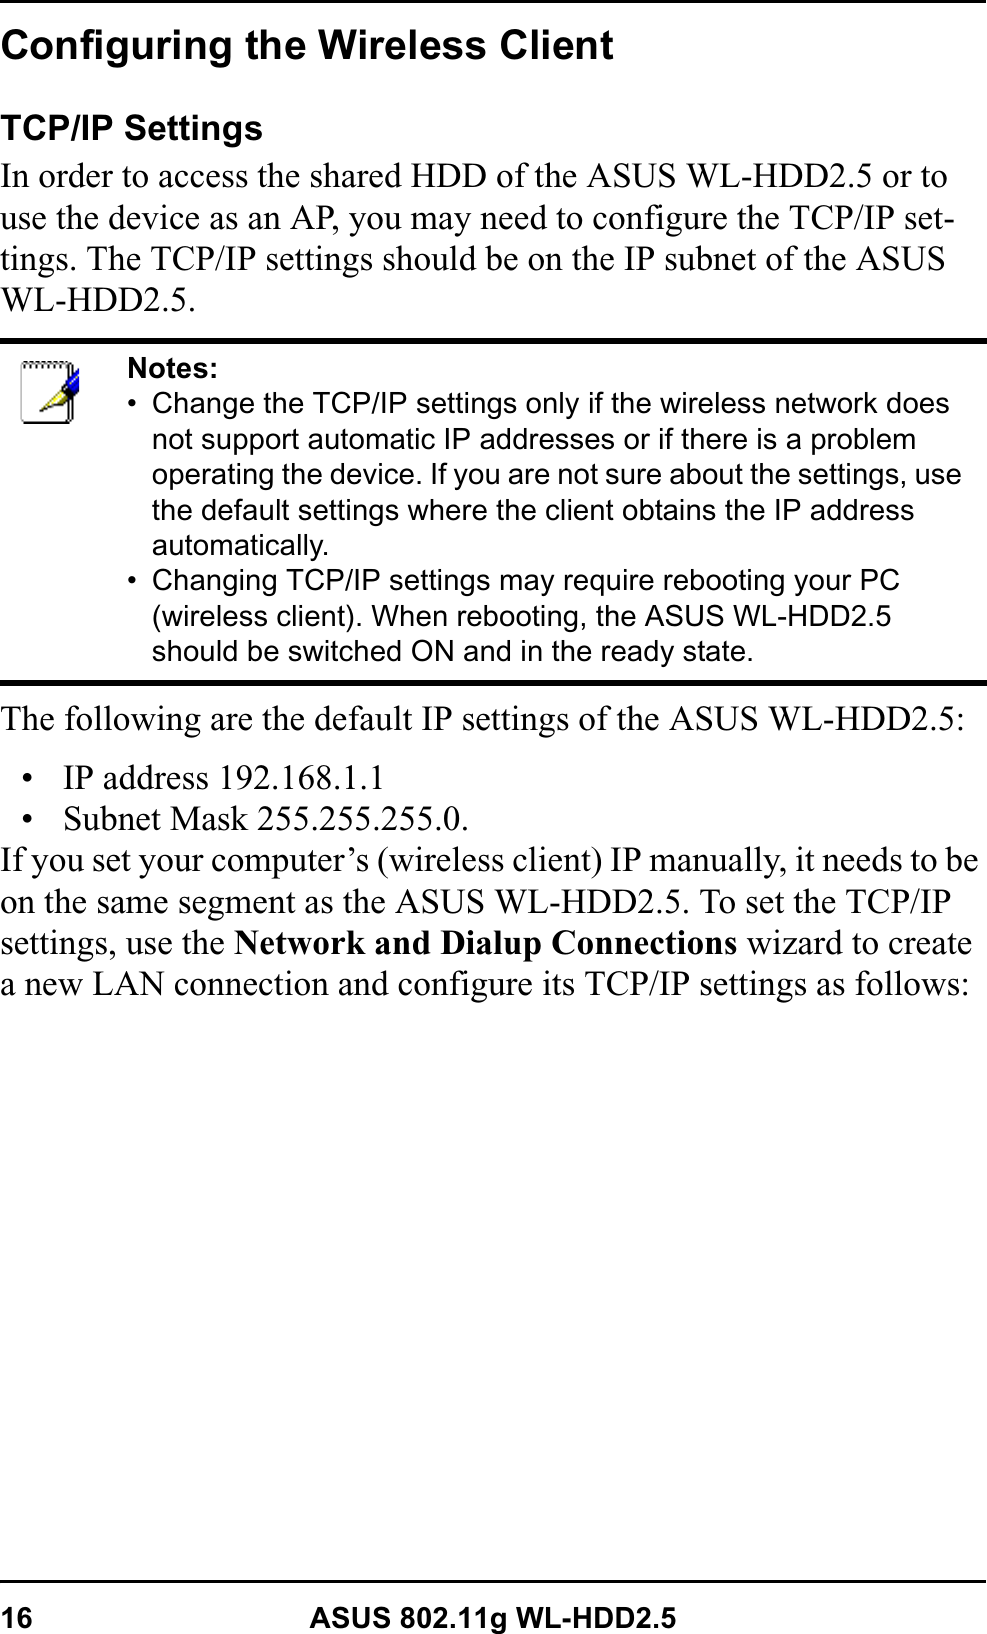 16 ASUS 802.11g WL-HDD2.5Configuring the Wireless ClientTCP/IP SettingsIn order to access the shared HDD of the ASUS WL-HDD2.5 or to use the device as an AP, you may need to configure the TCP/IP set-tings. The TCP/IP settings should be on the IP subnet of the ASUS WL-HDD2.5.The following are the default IP settings of the ASUS WL-HDD2.5:• IP address 192.168.1.1• Subnet Mask 255.255.255.0. If you set your computer’s (wireless client) IP manually, it needs to be on the same segment as the ASUS WL-HDD2.5. To set the TCP/IP settings, use the Network and Dialup Connections wizard to create a new LAN connection and configure its TCP/IP settings as follows:Notes:• Change the TCP/IP settings only if the wireless network does not support automatic IP addresses or if there is a problem operating the device. If you are not sure about the settings, use the default settings where the client obtains the IP address automatically.• Changing TCP/IP settings may require rebooting your PC (wireless client). When rebooting, the ASUS WL-HDD2.5 should be switched ON and in the ready state.